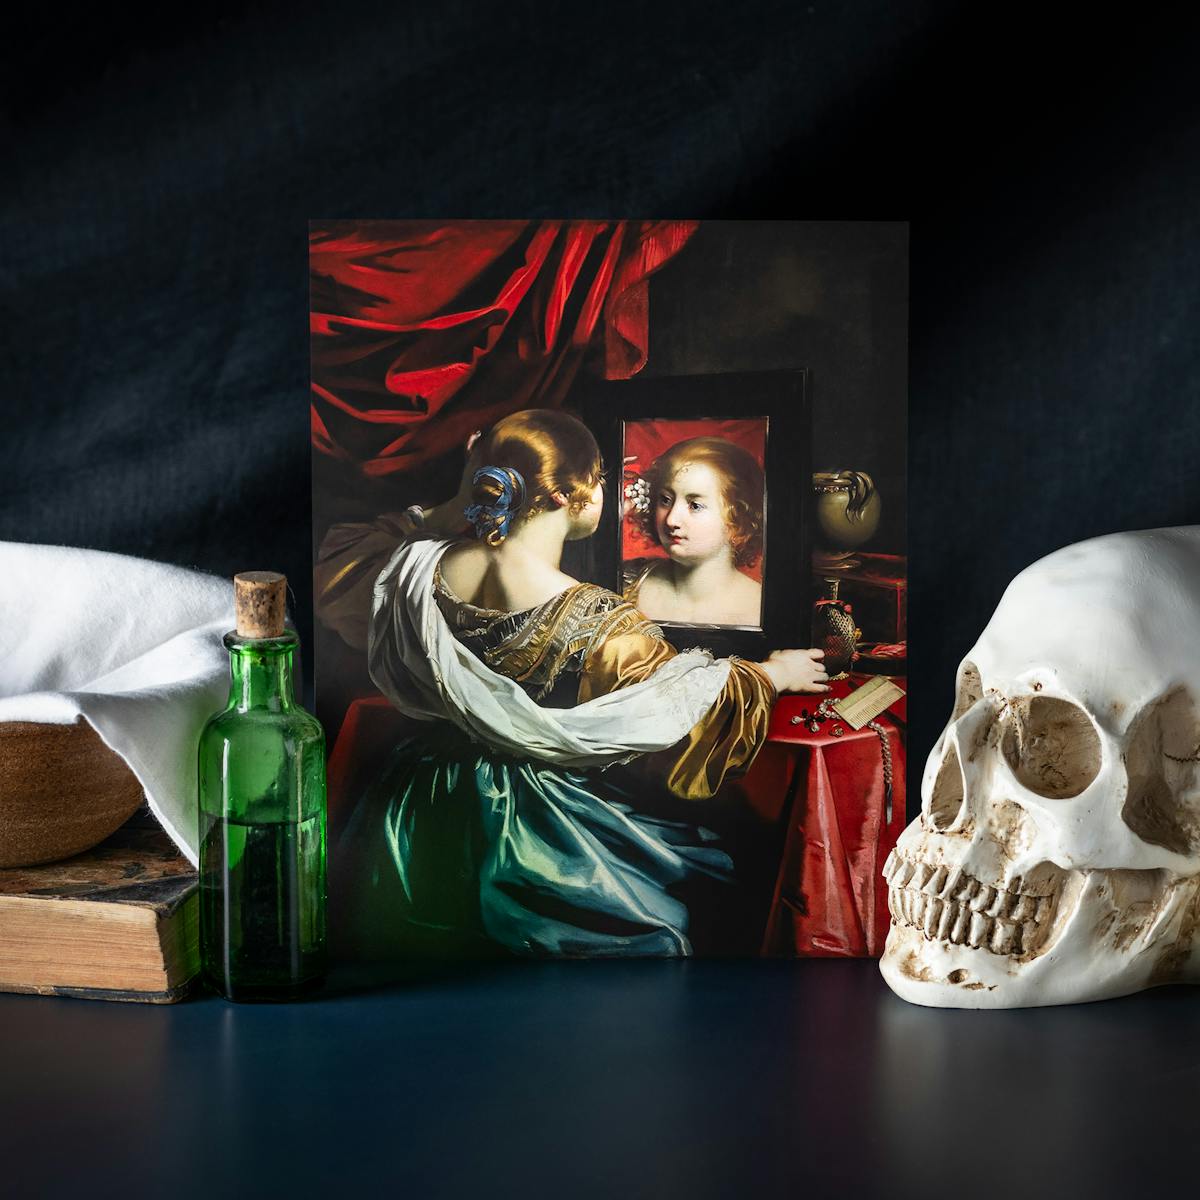 A still life photograph showing a reproduction of a painting depicting a renaissance women sat her dressing table, looking at her reflection in a mirror. She is draped in fine clothes depicting her wealth, with bold red curtains in the back ground. Surrounding the painting are objects including a skull, a dark green apothecary bottle, a book, a bowl and a candle. The scene is presented against a dark cloth background.